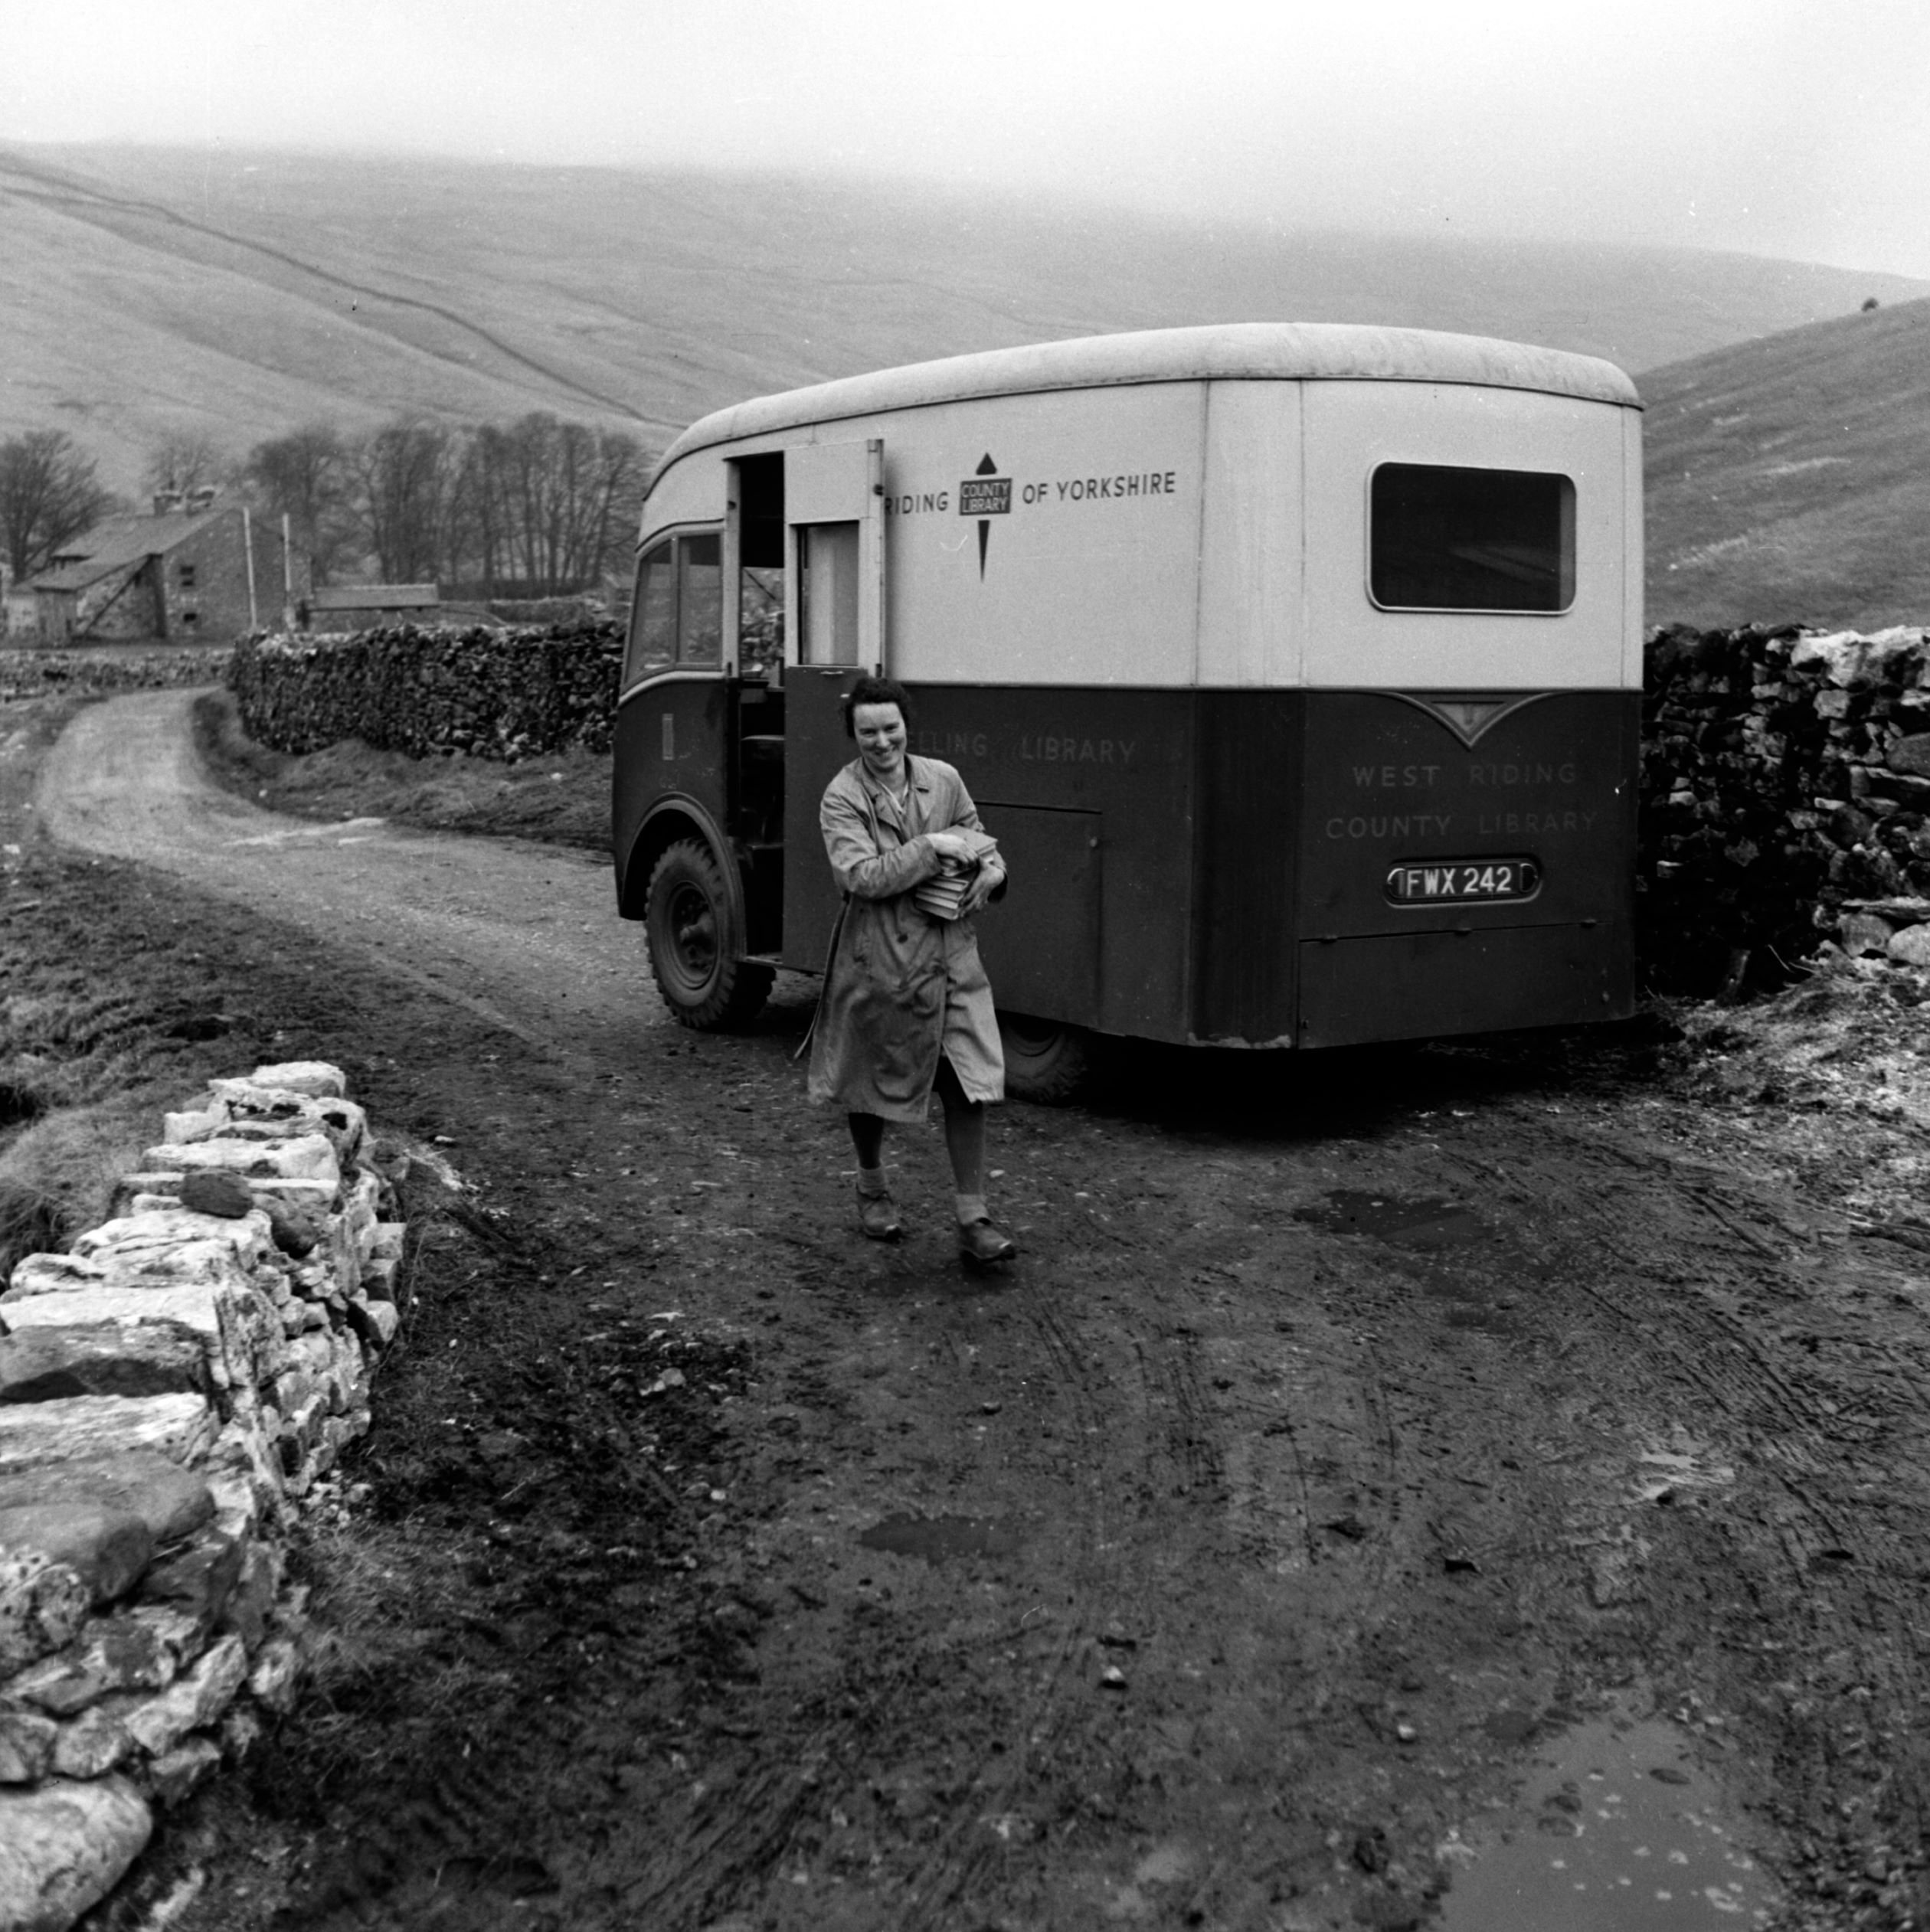 A mobile library visiting Foxup in Littondale in the 1950s, from the Bertram Unné photographic collection.